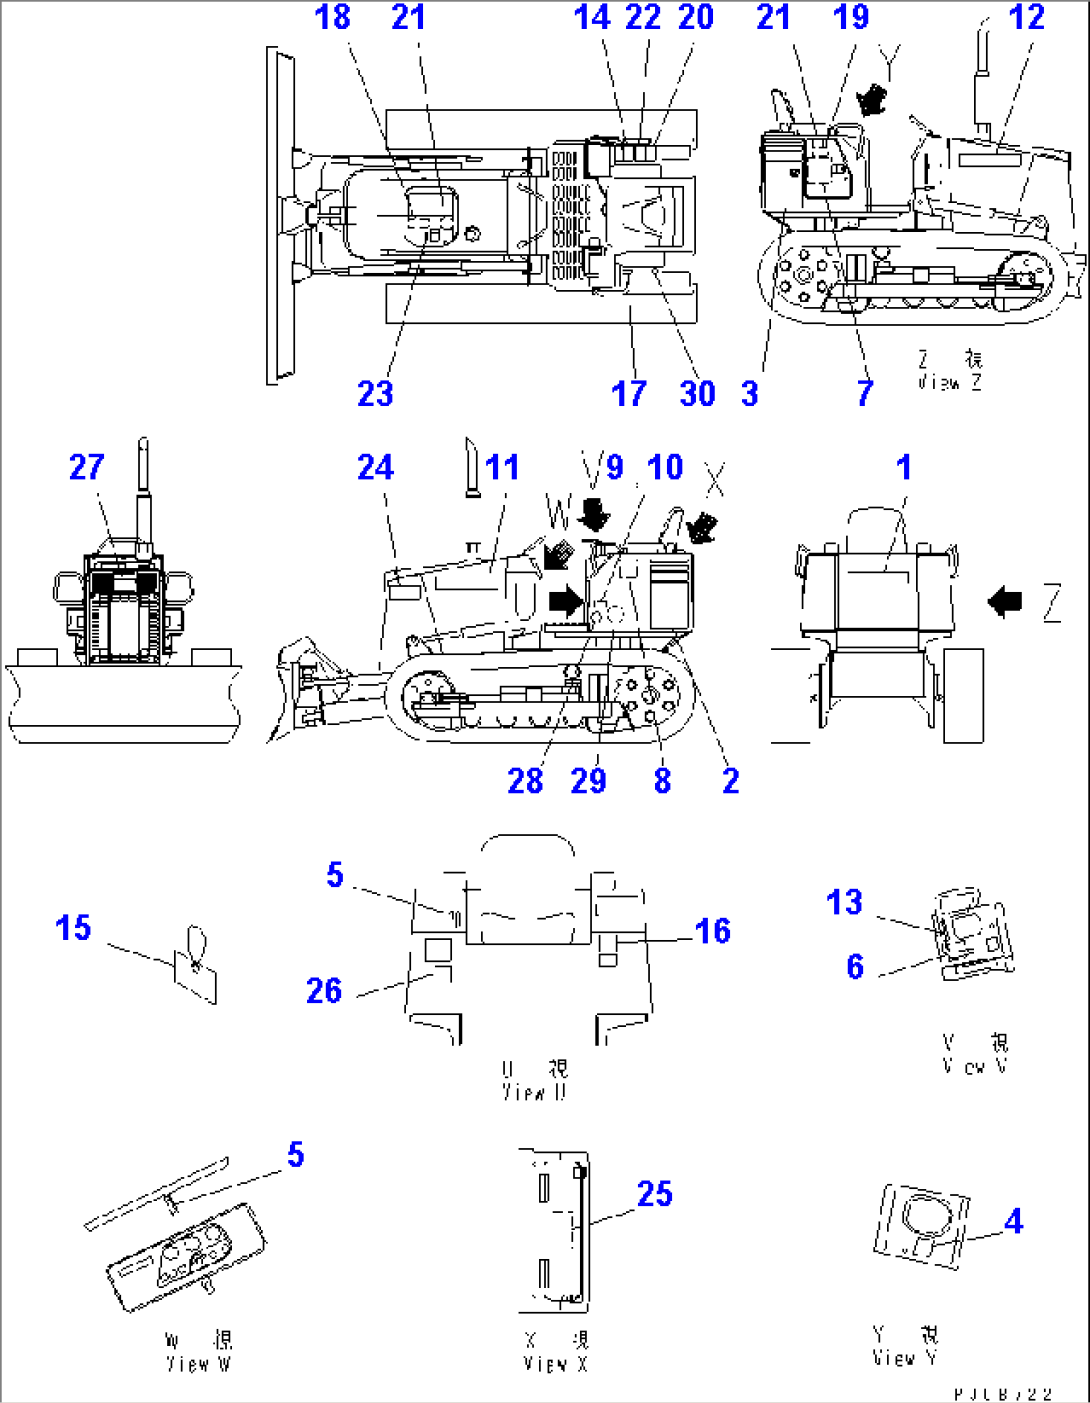 MARKS AND PLATES (JAPANESE)(FOR ROPS CAB)